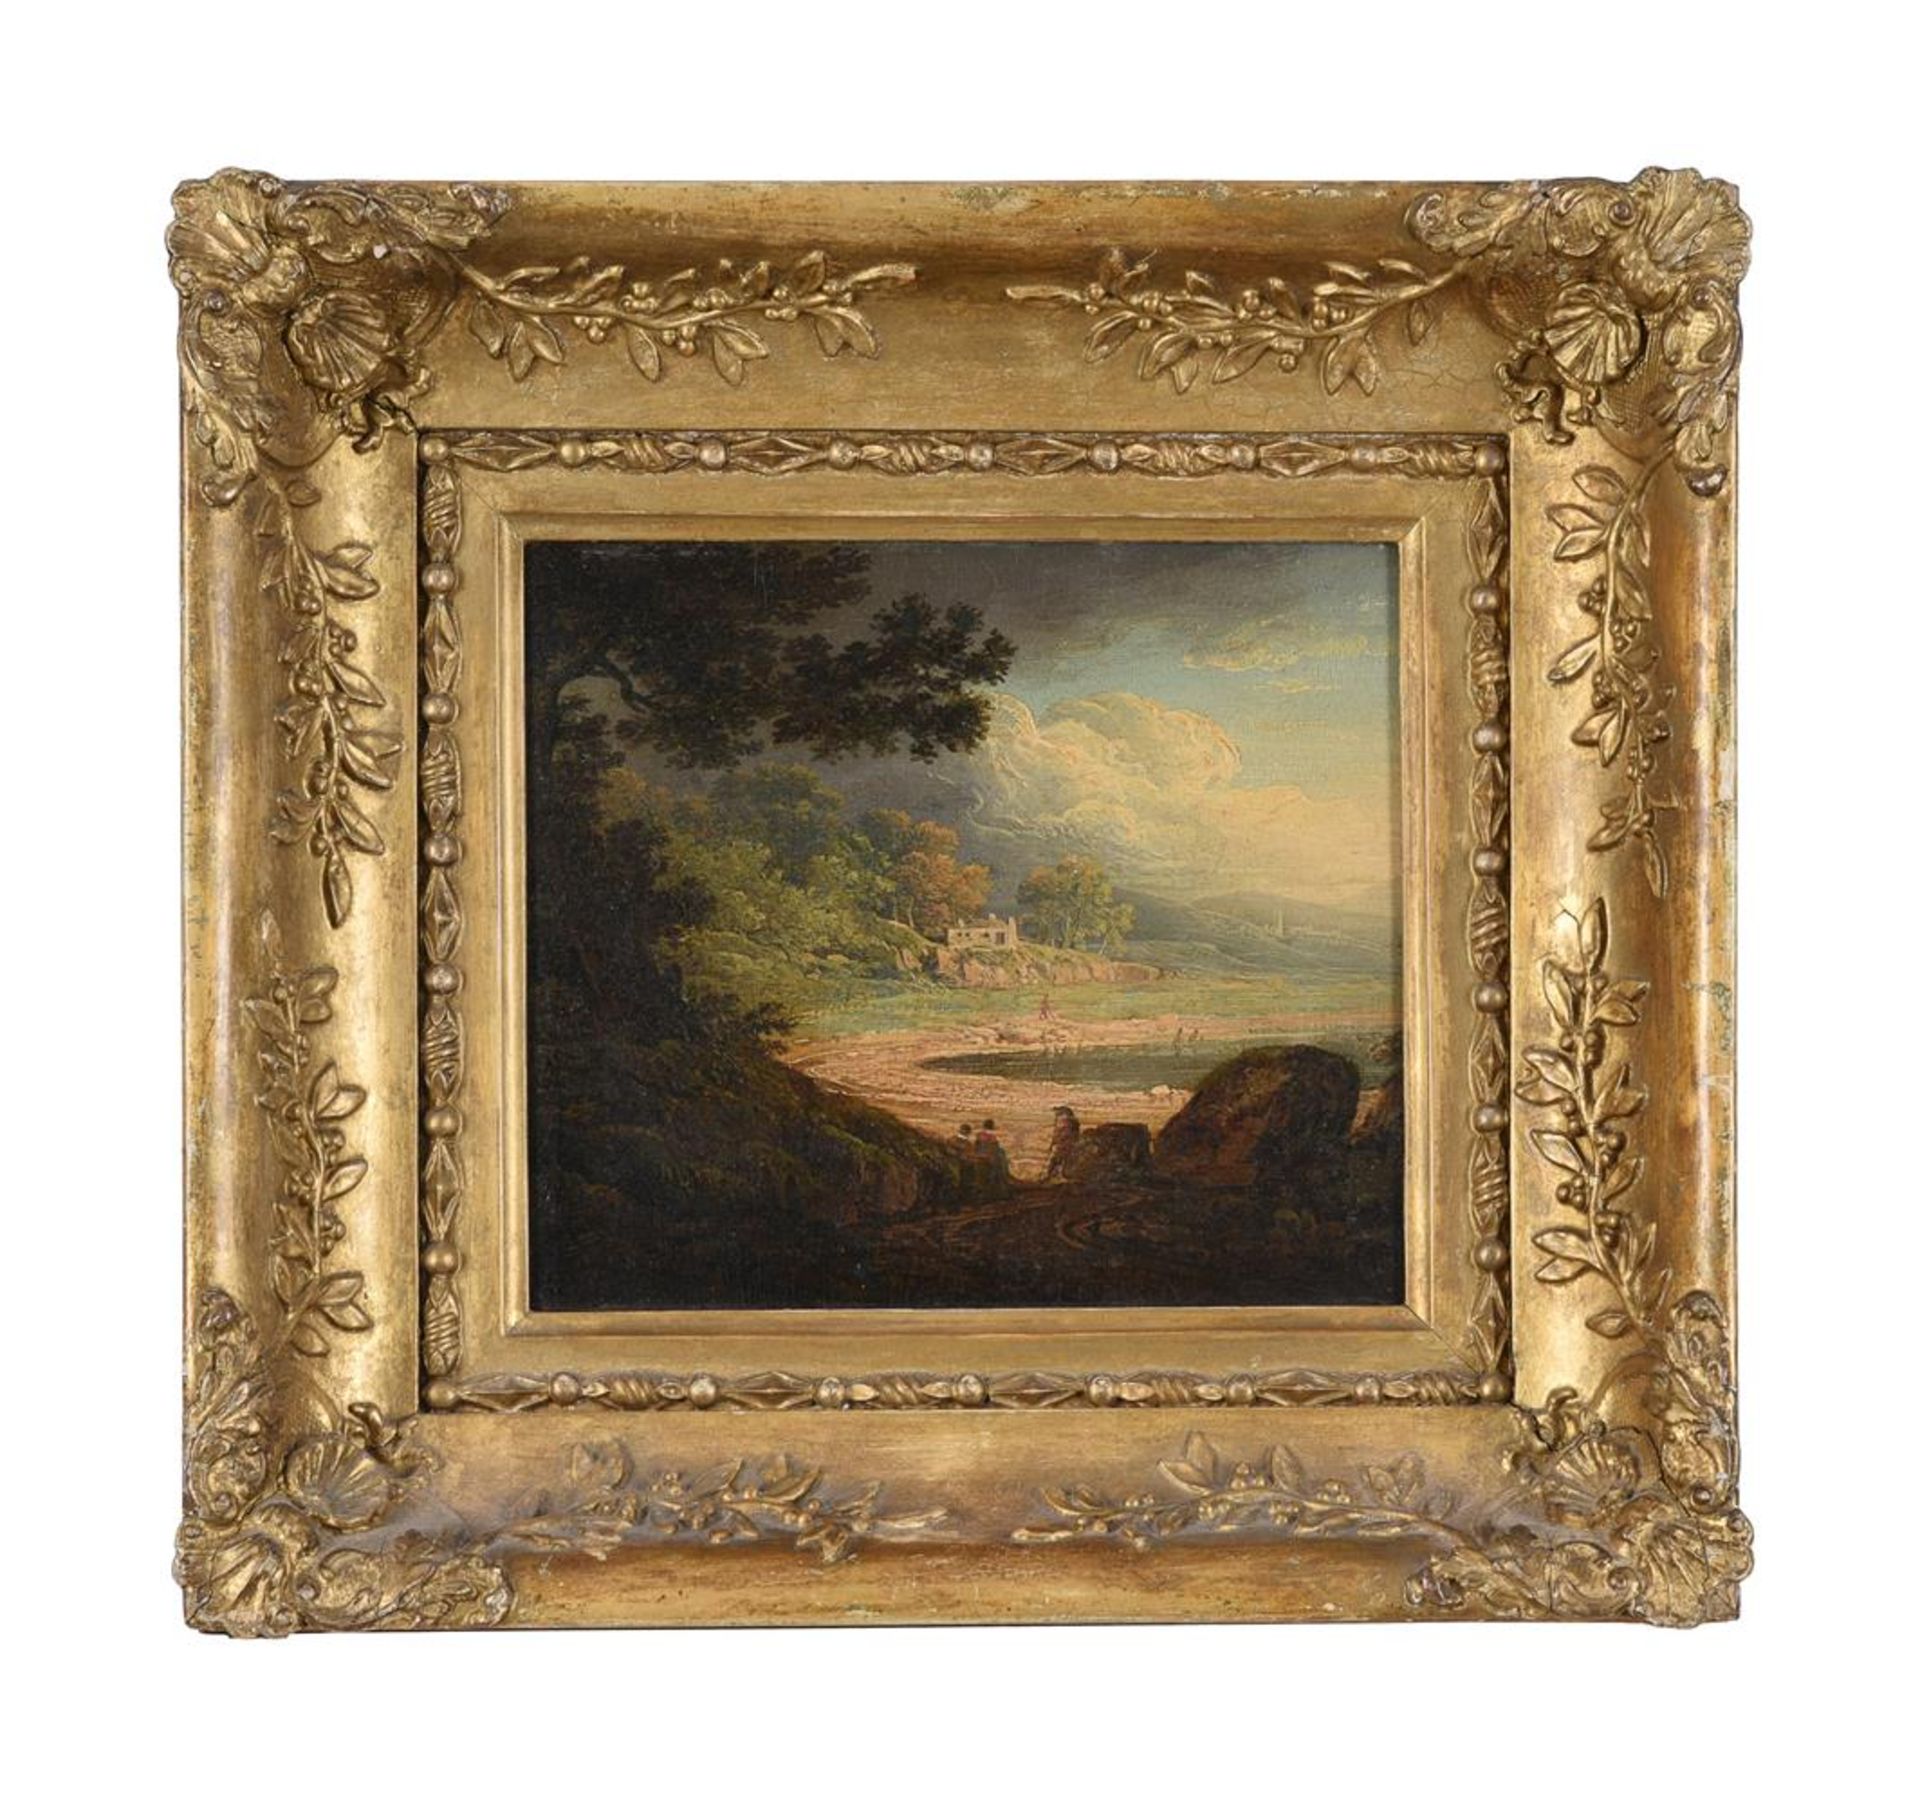 ENGLISH SCHOOL (19TH CENTURY), A WOODED LANDSCAPE WITH FIGURES BY A LAKE